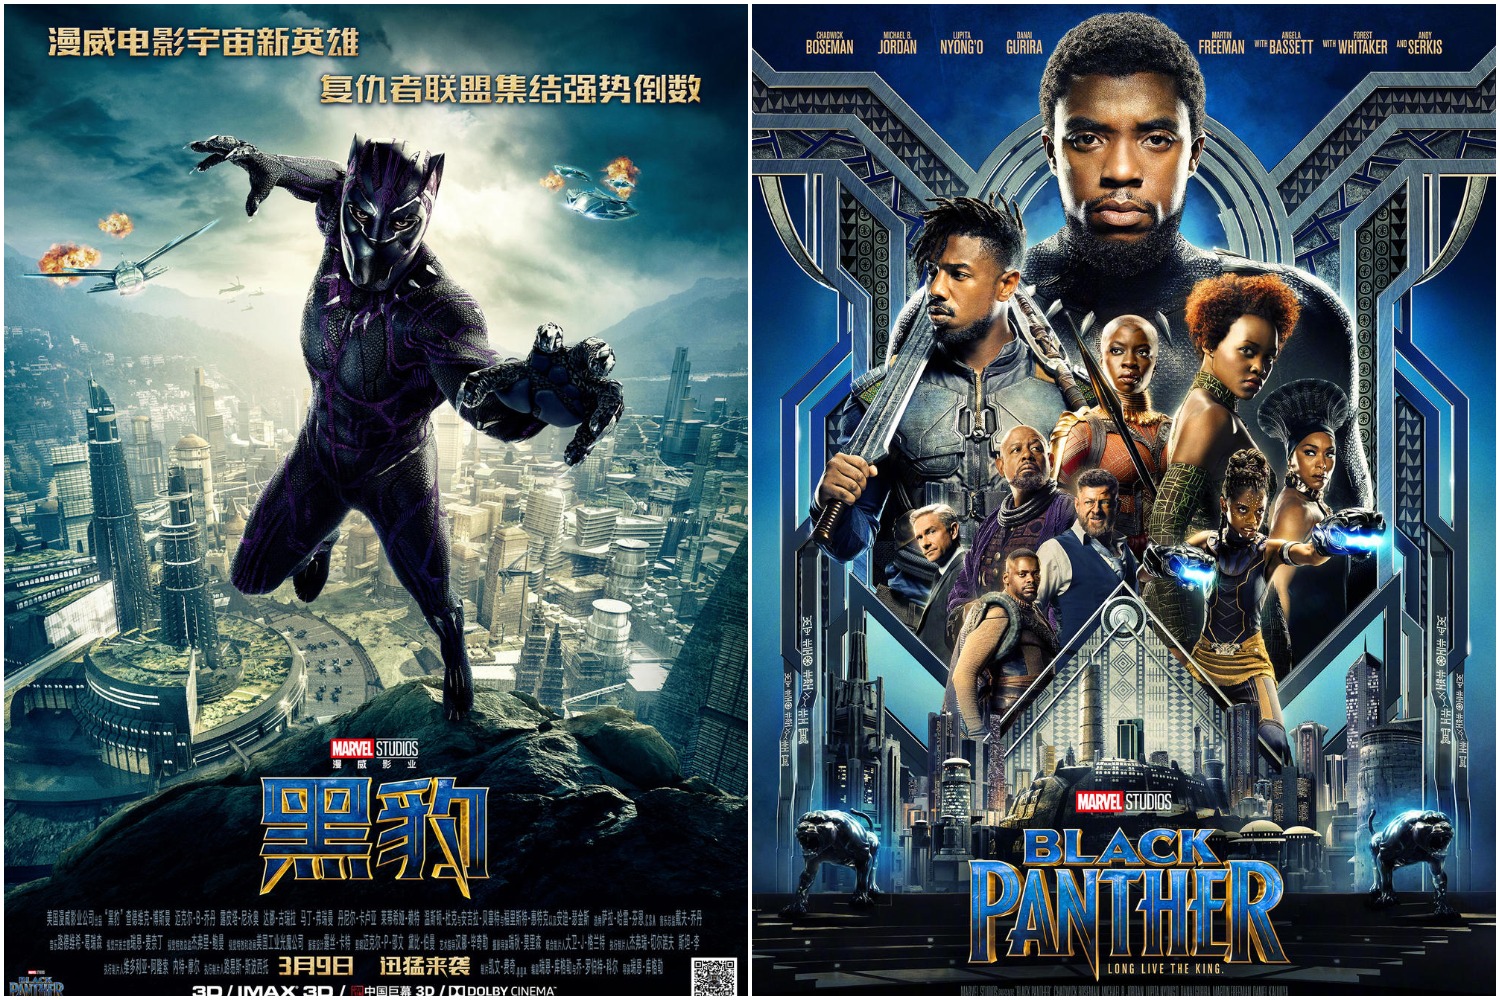 Black Panther: a success in theaters